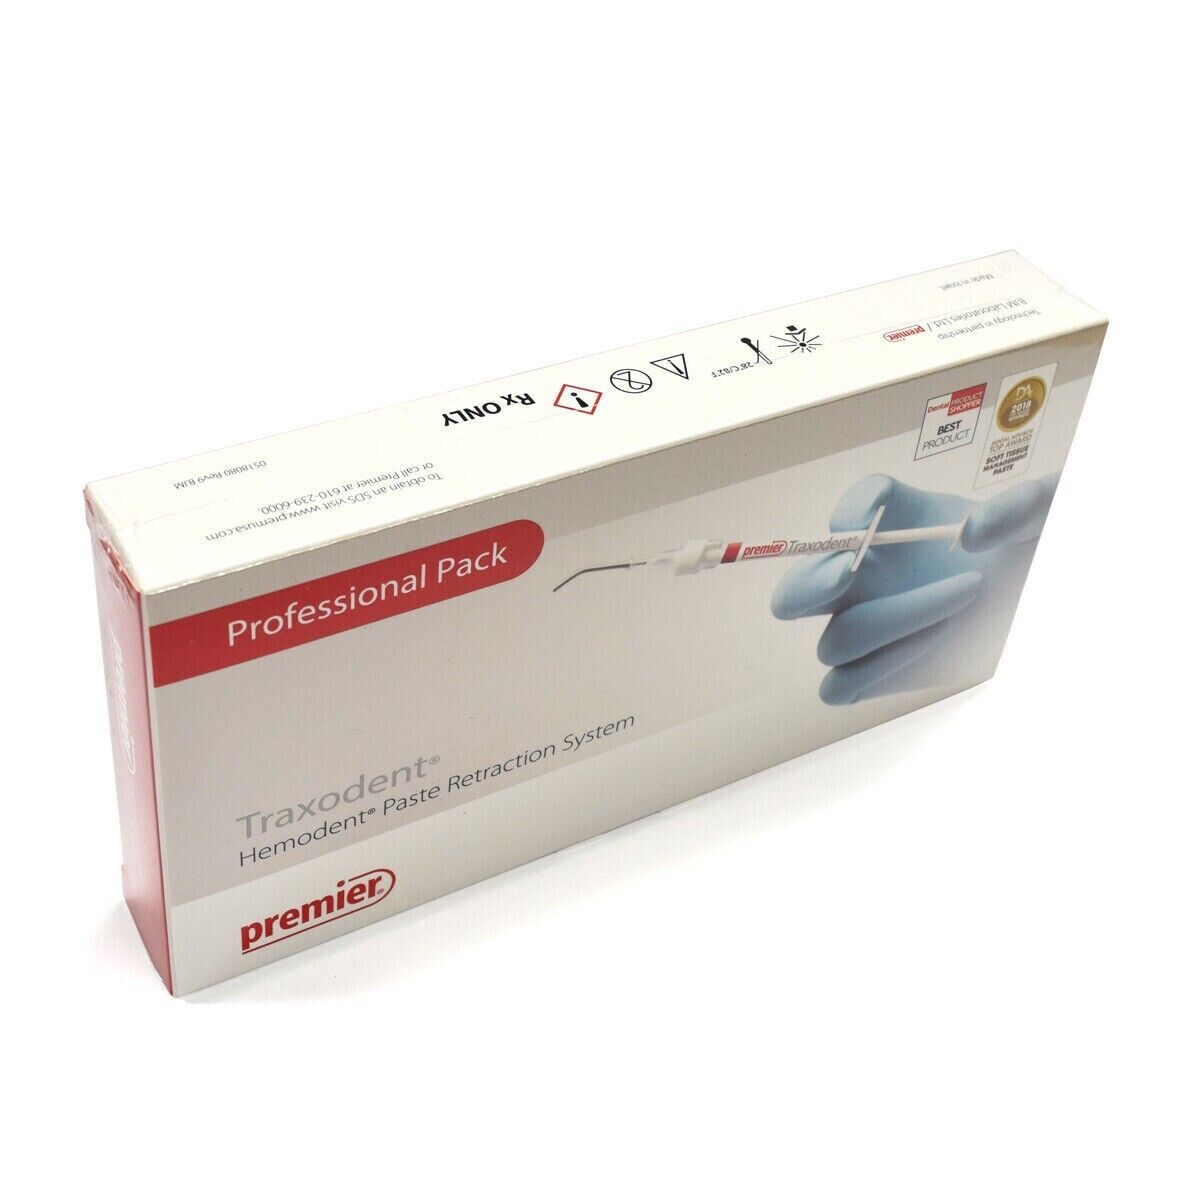 Traxodent by Premier Dental USA Hemodent Paste Retraction System